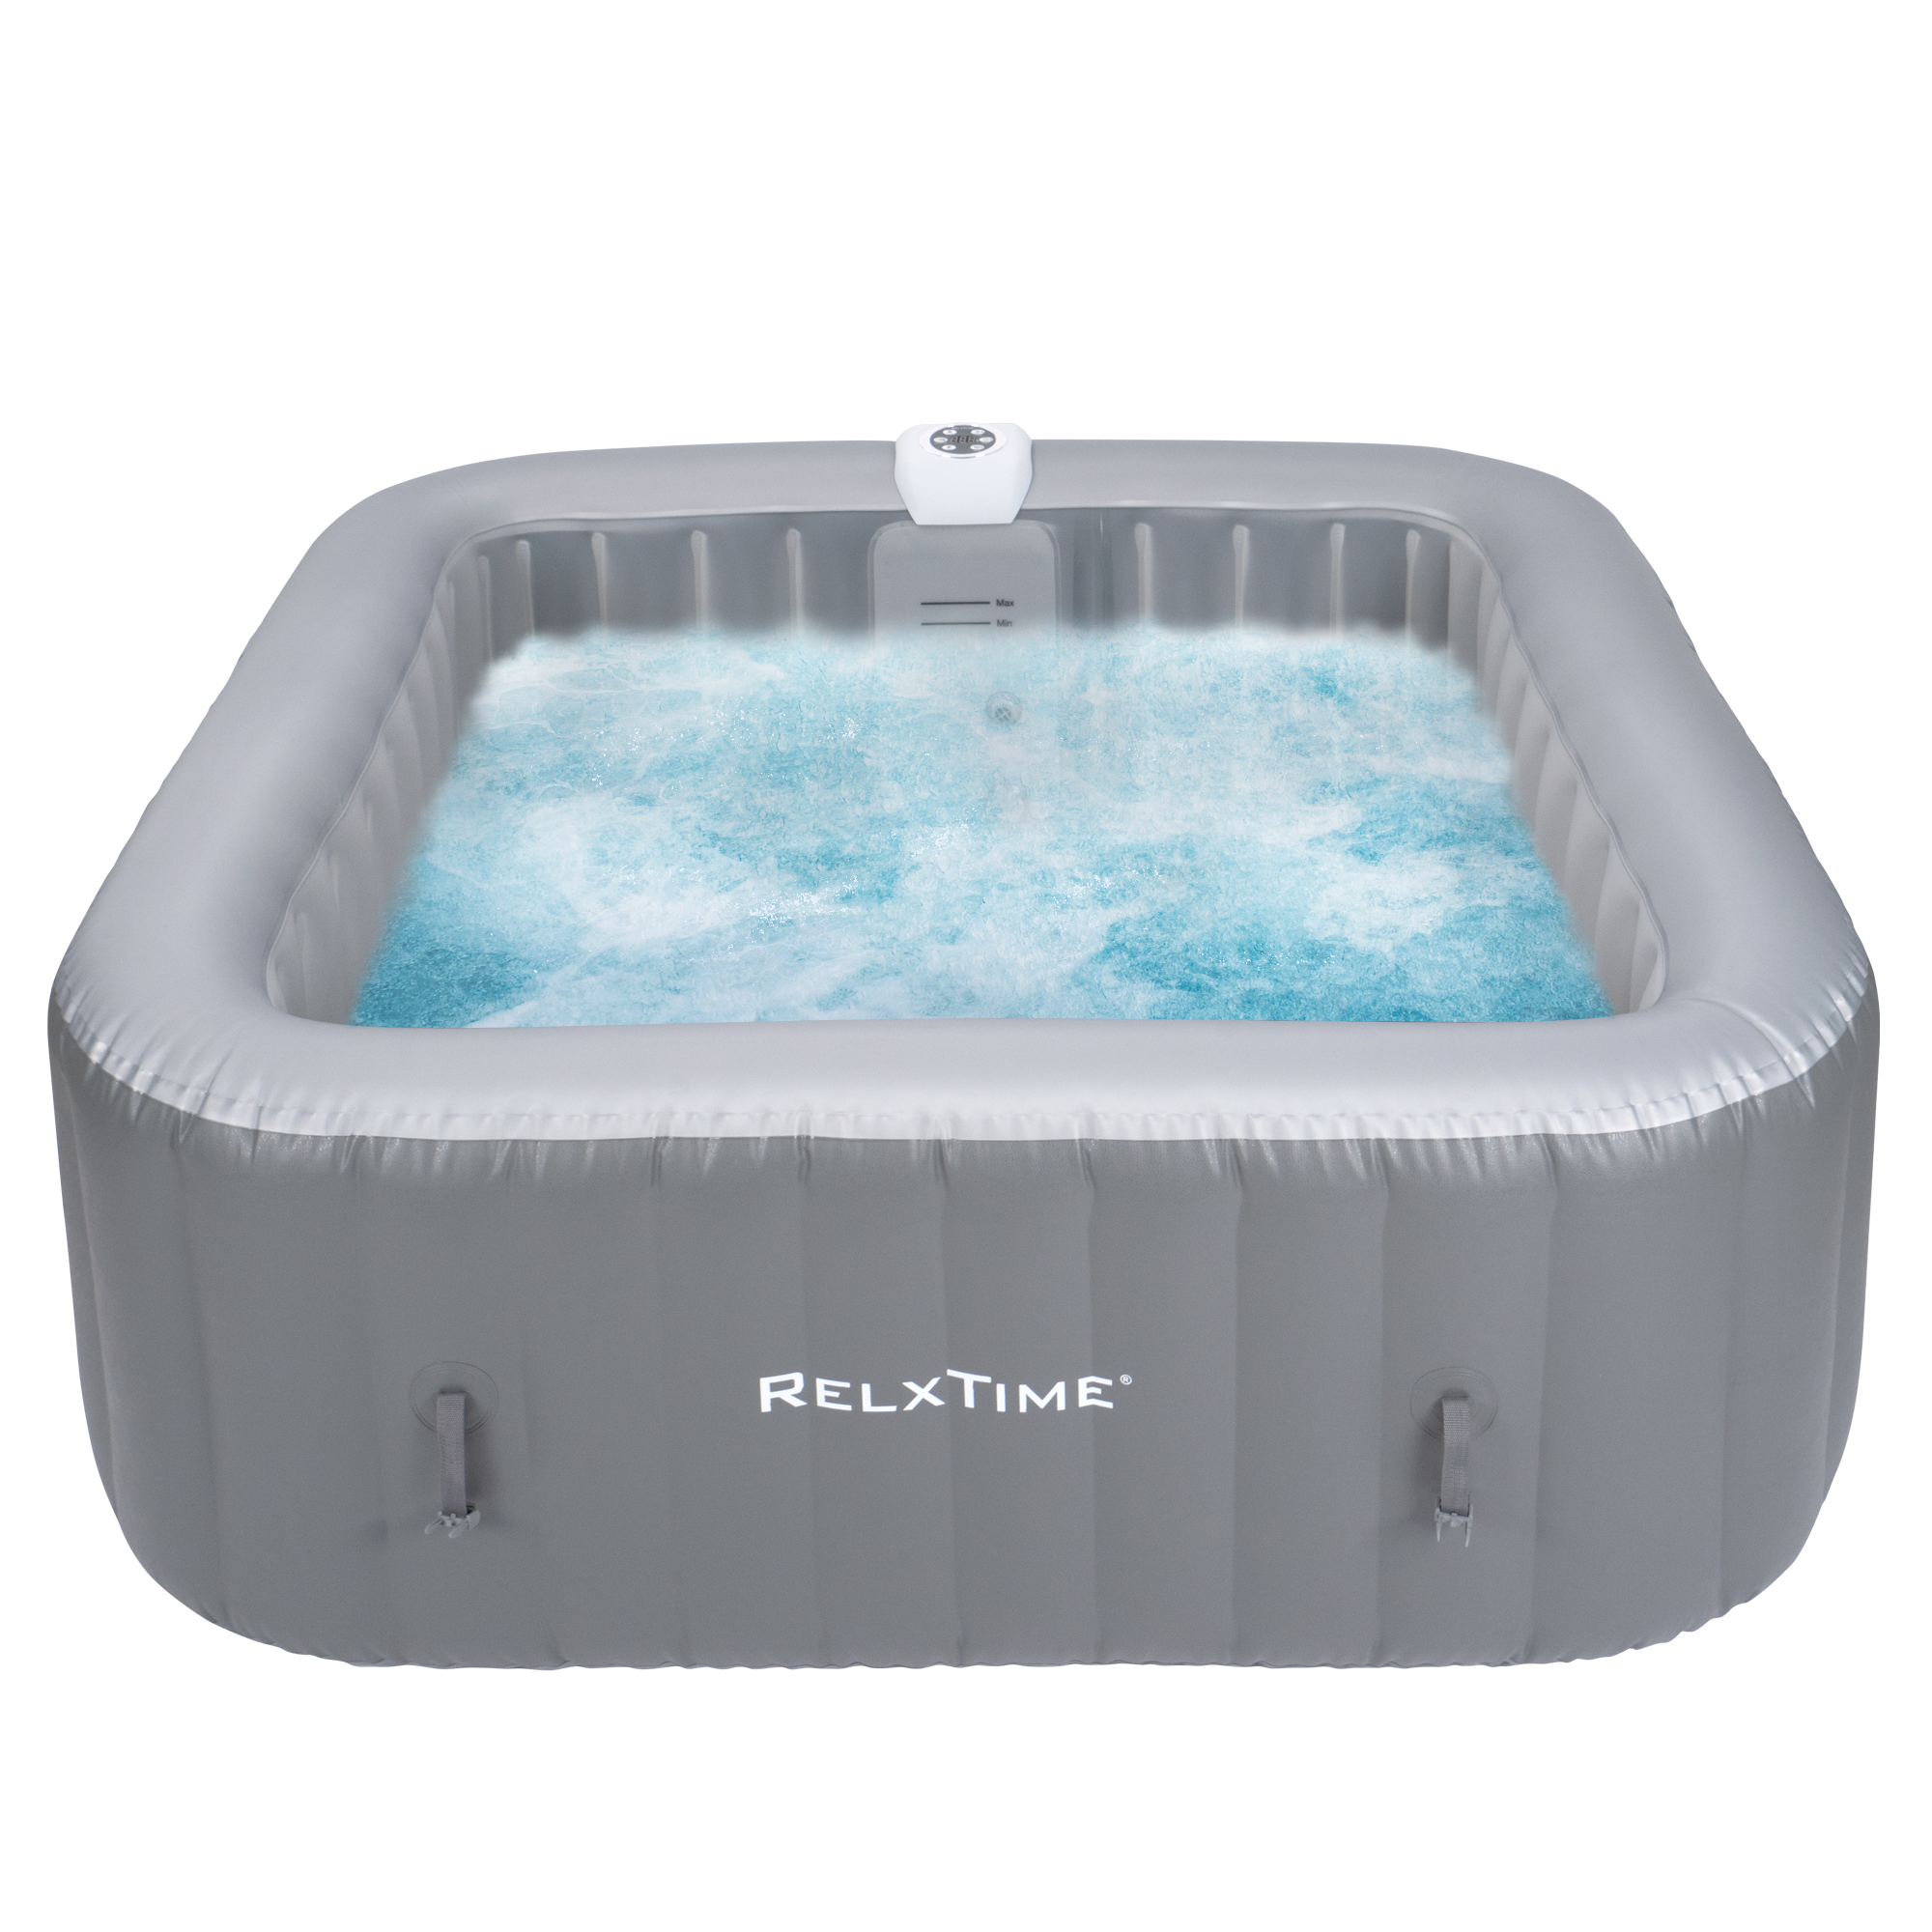 Relxtime 6 Person Square Inflatable Hot Tub 130 Massaging Air Jets Grey Laminated Classic Spa